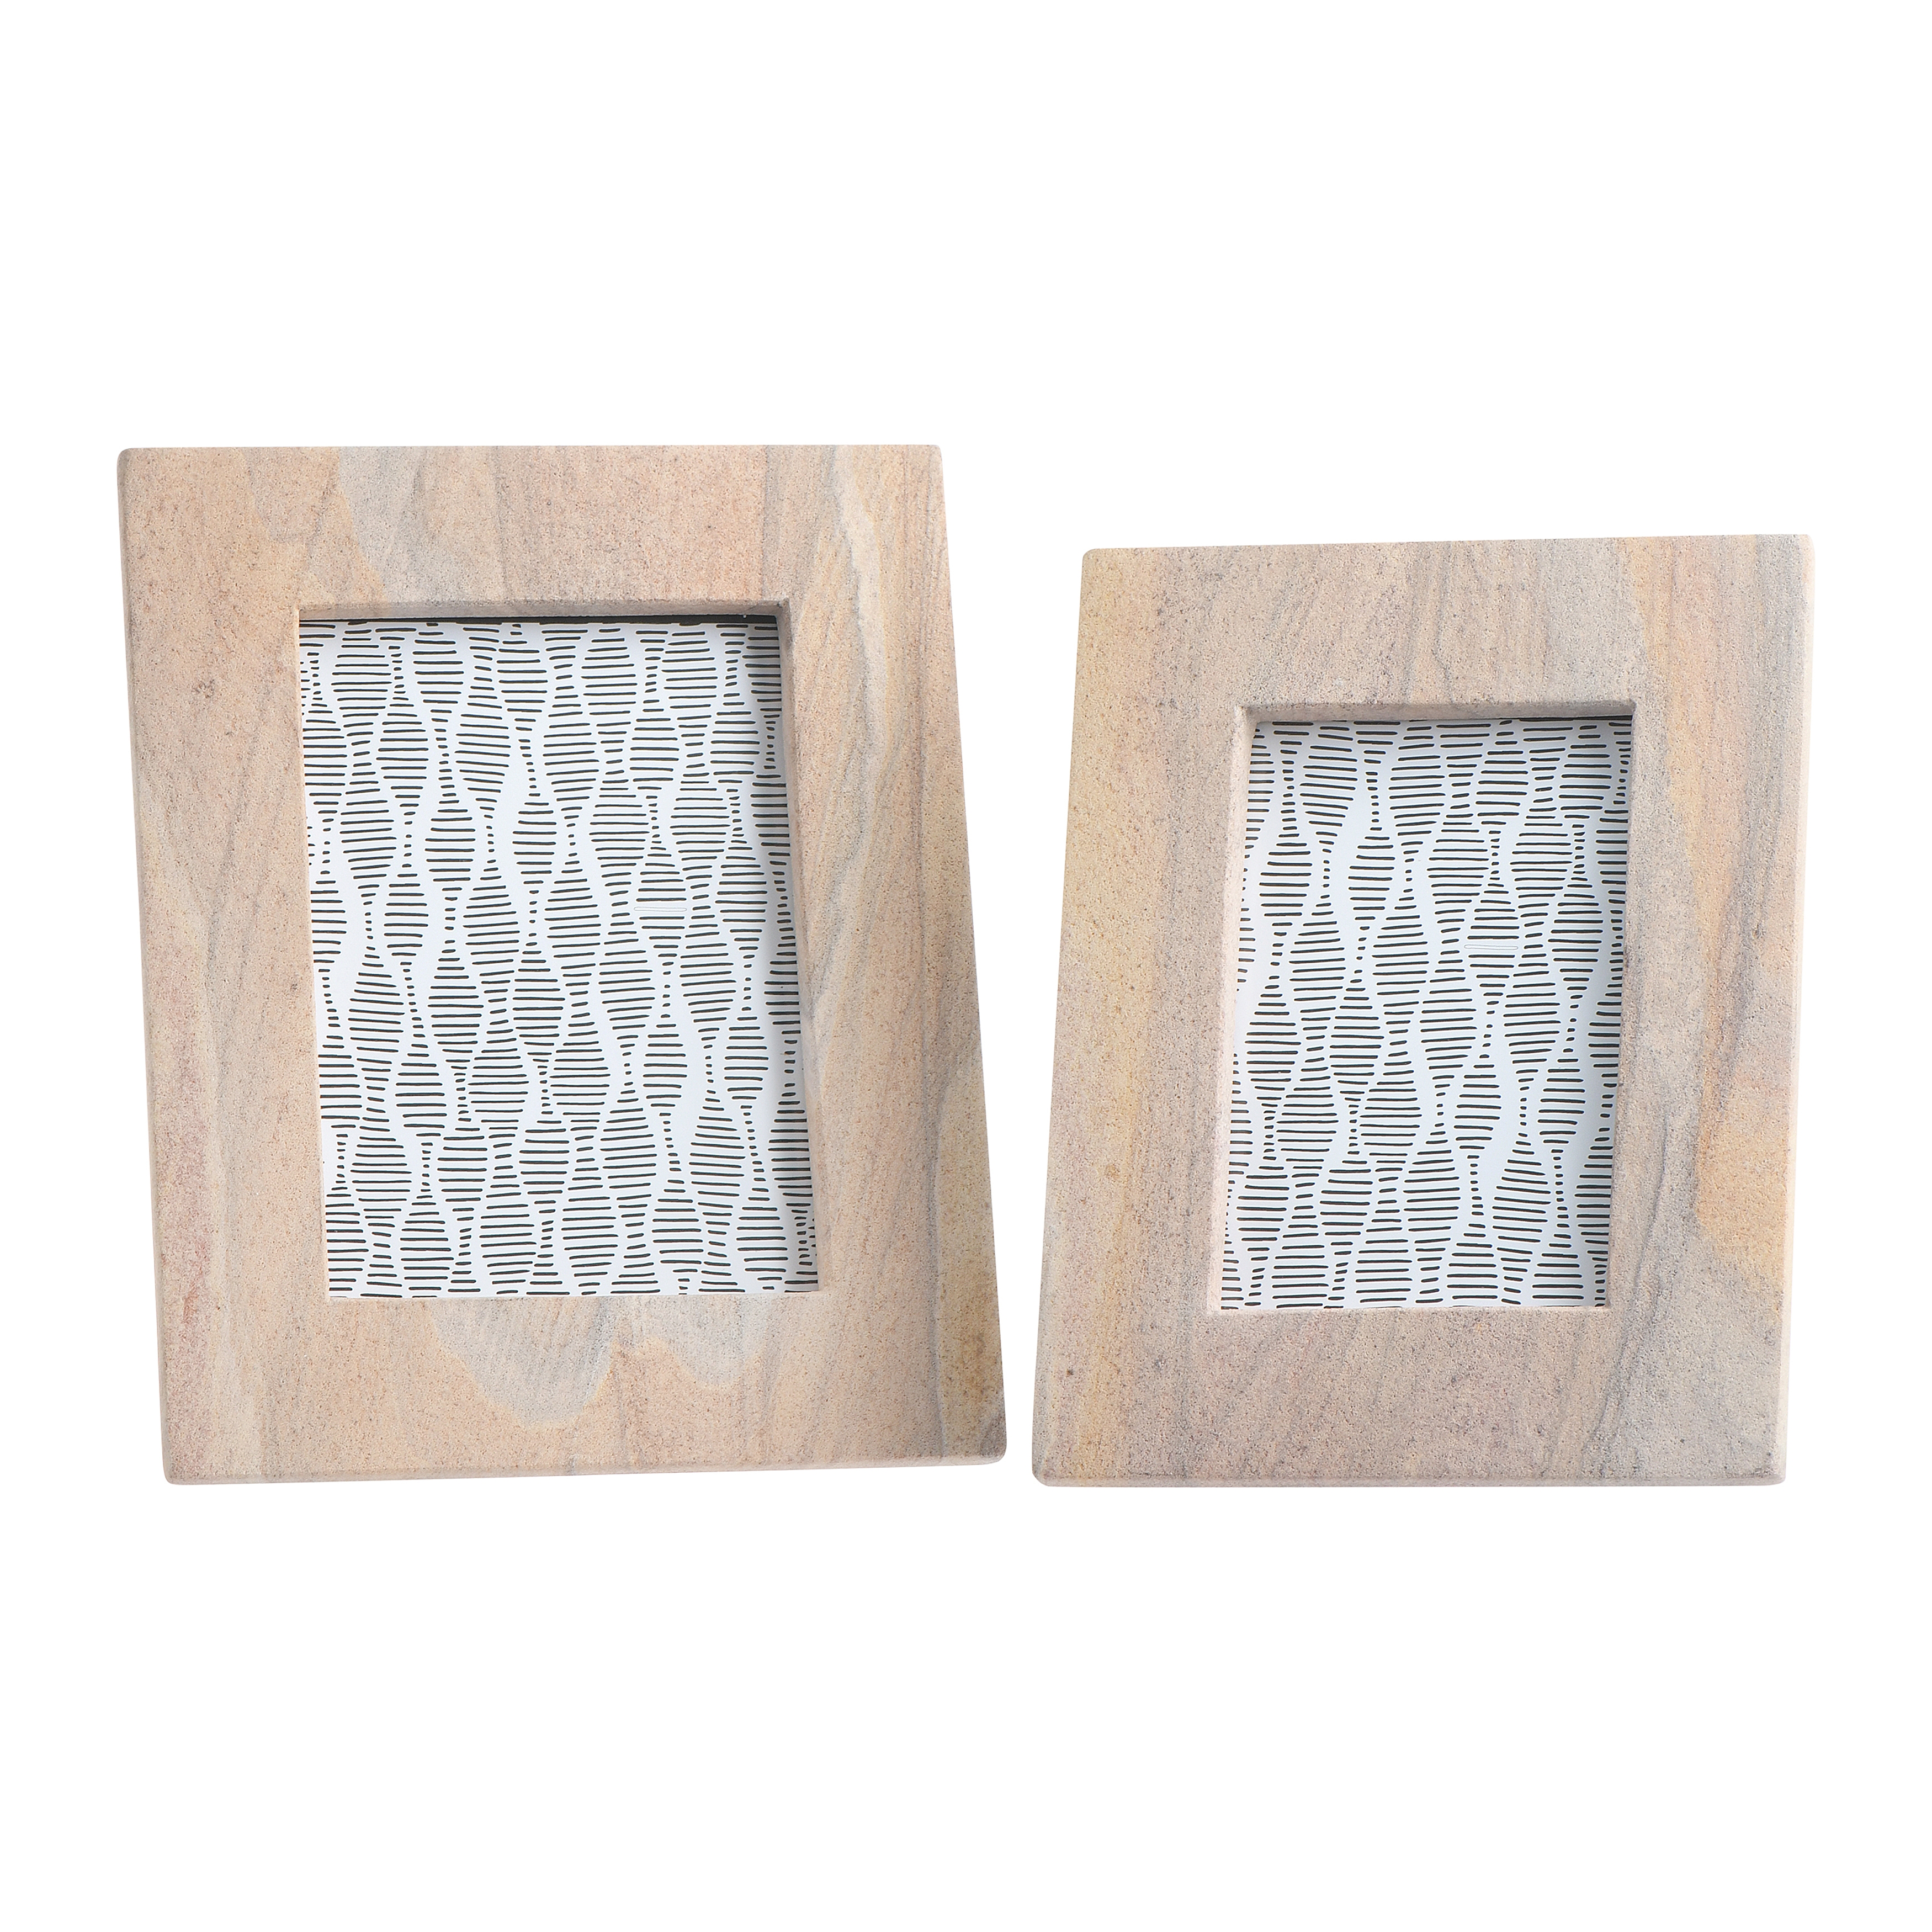 Sandstone Photo Frames, Set of 2 (4x6” and 5x7”) - Image 0